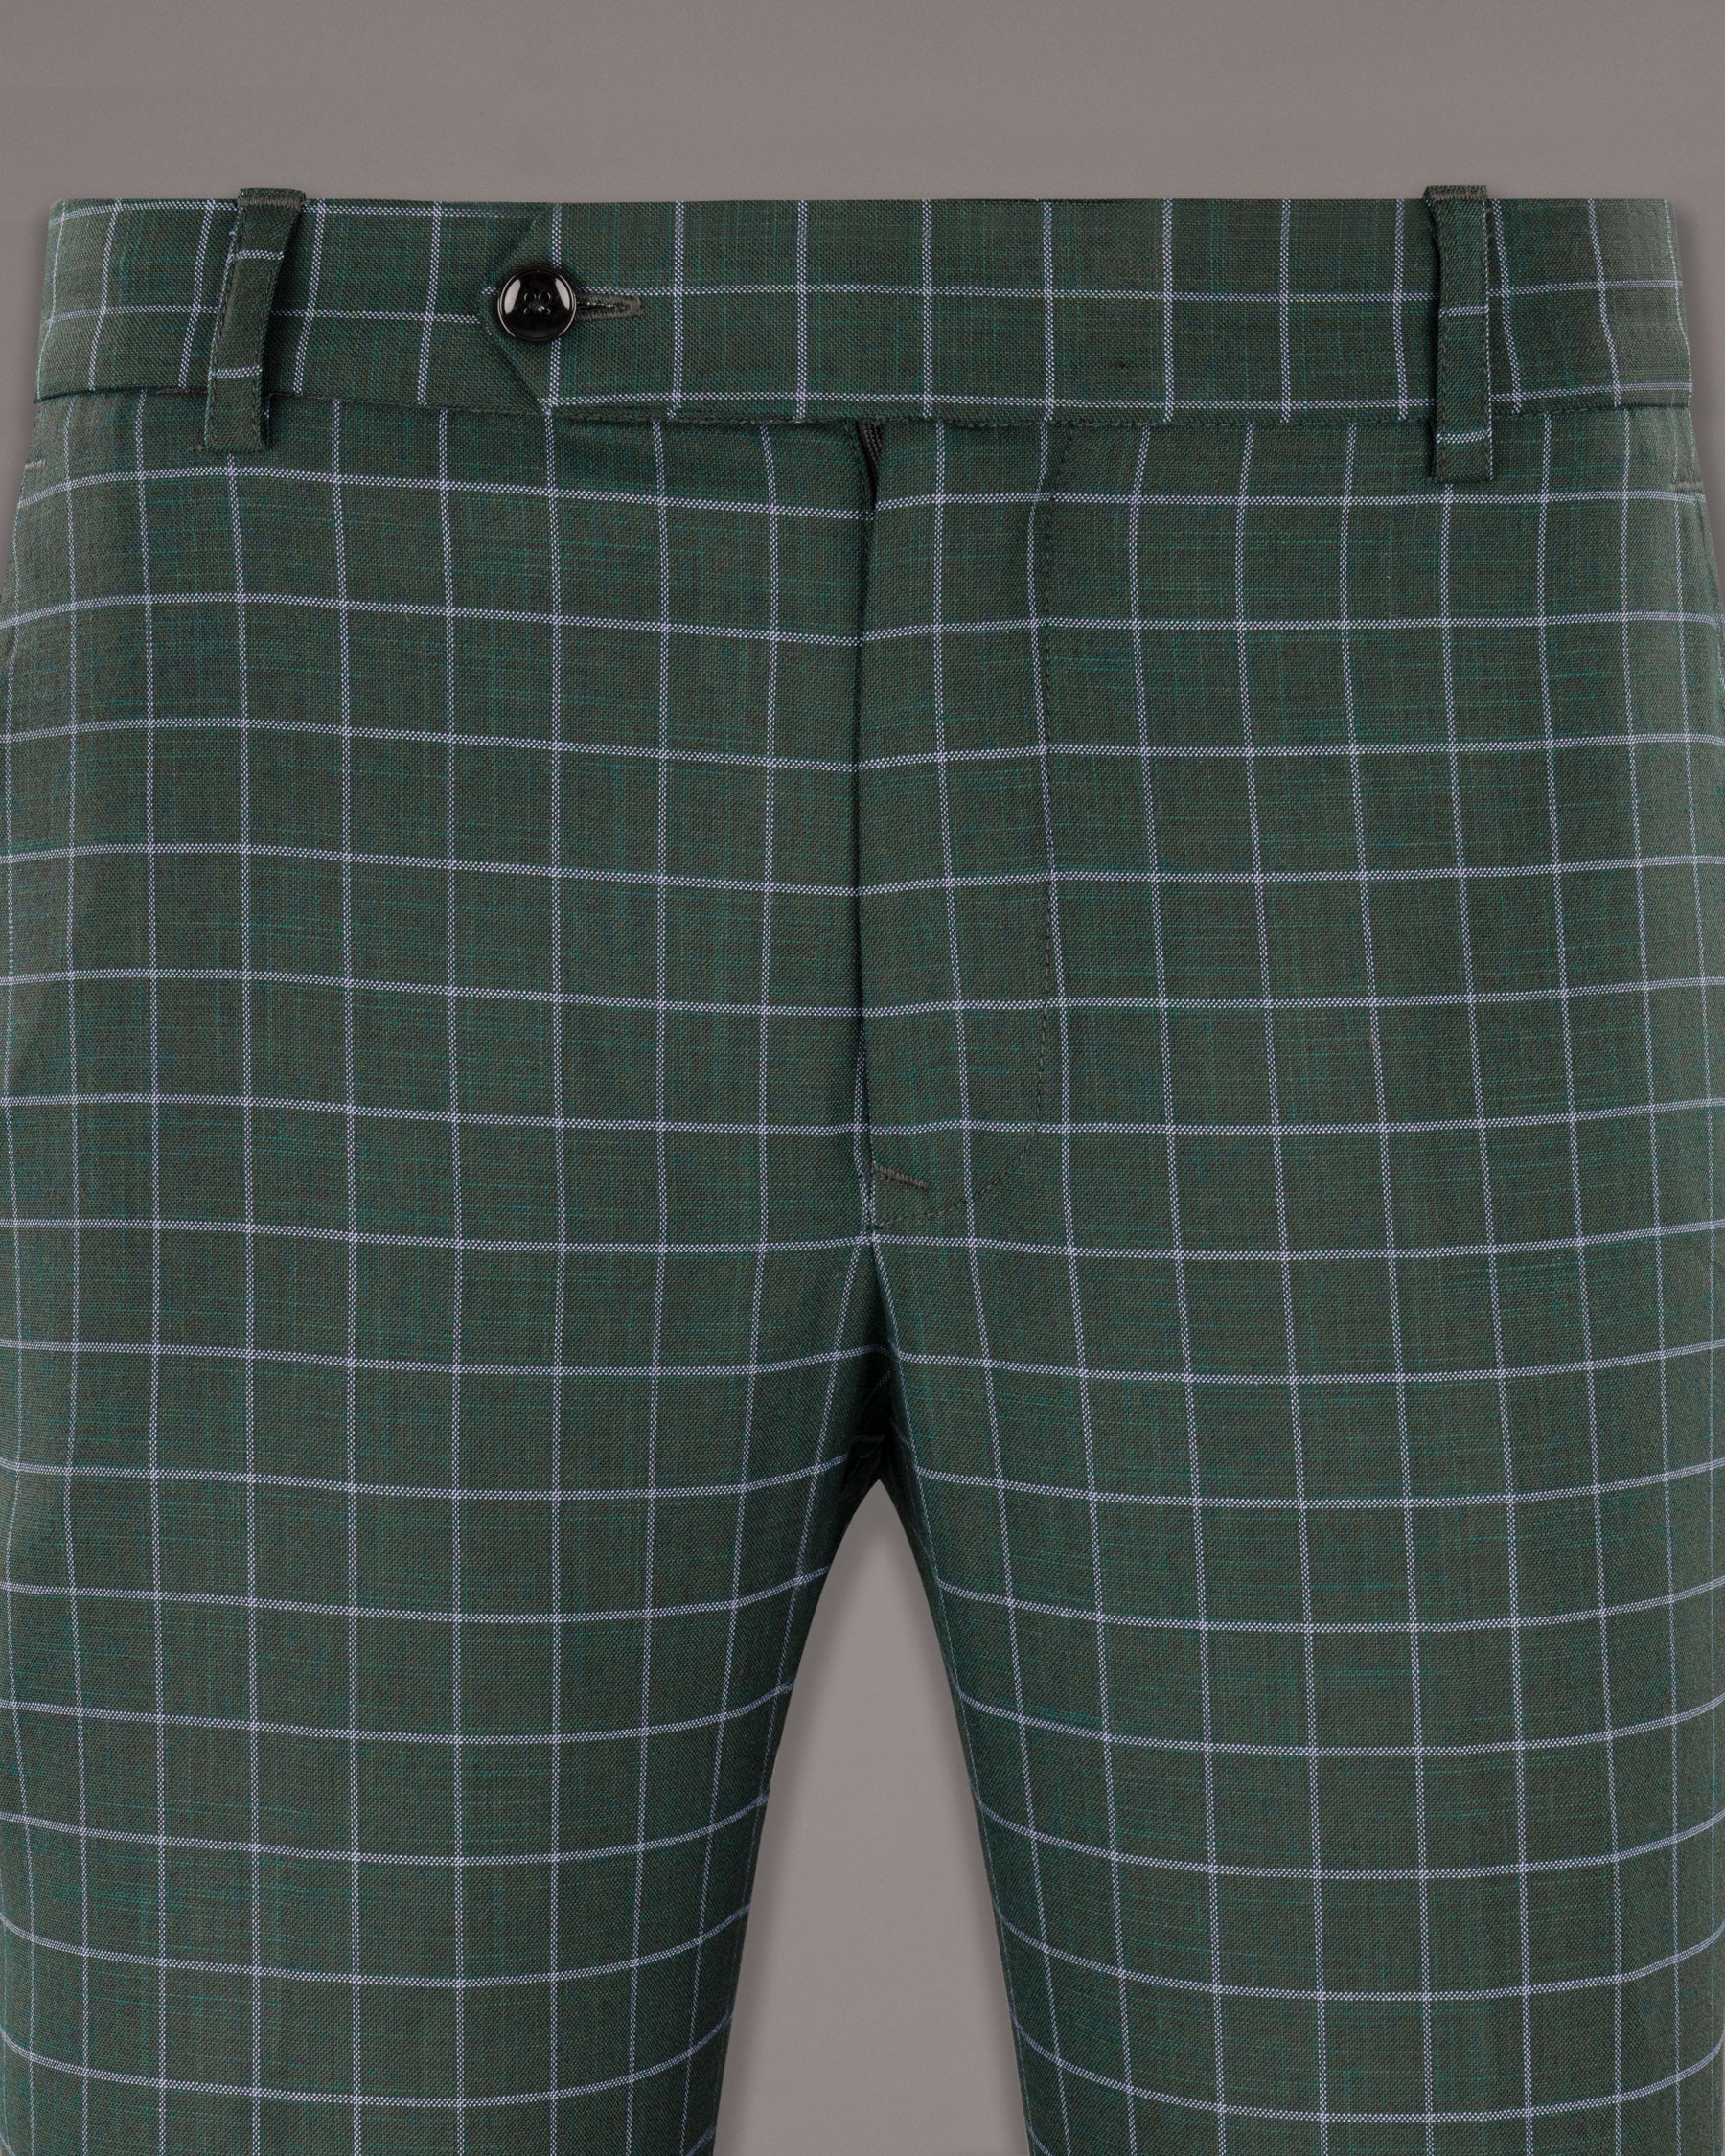 Cable Green Windowpane Wool Rich Pant T1226-28, T1226-30, T1226-32, T1226-34, T1226-36, T1226-38, T1226-40, T1226-42, T1226-44